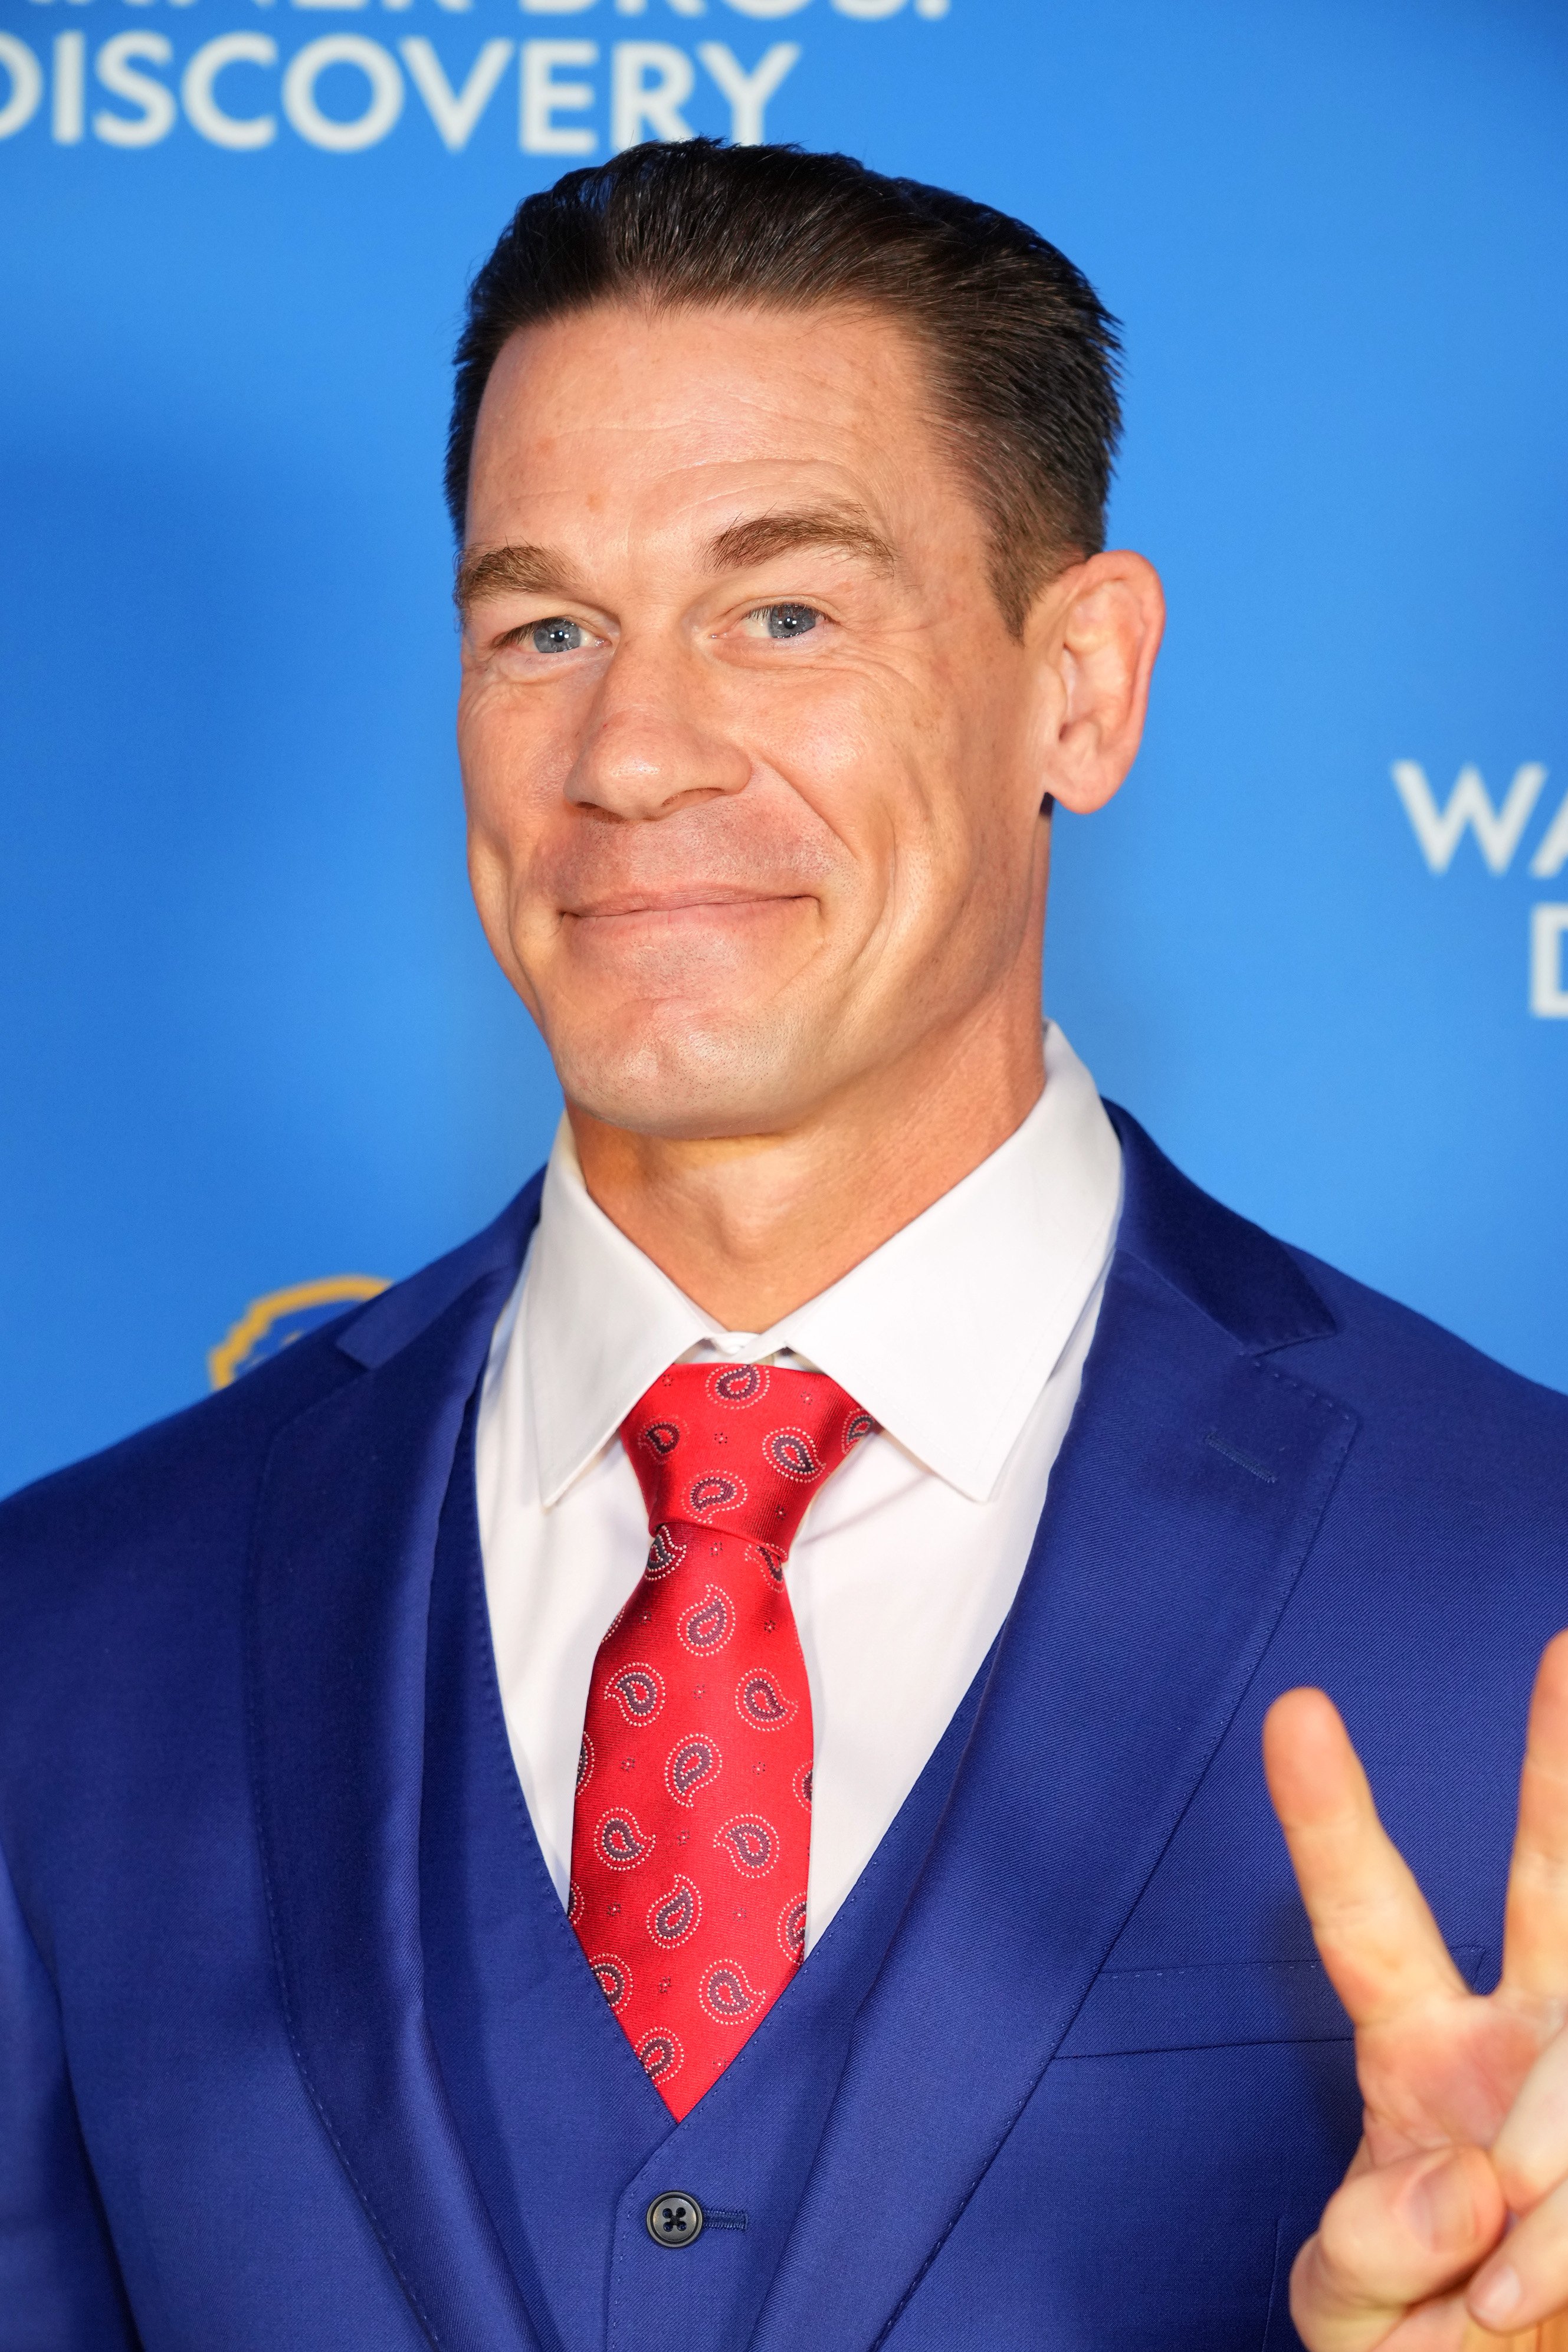 John Cena at the Warner Bros. Discovery Upfront 2022 on May 18, 2022, in New York City. | Source: Getty Images